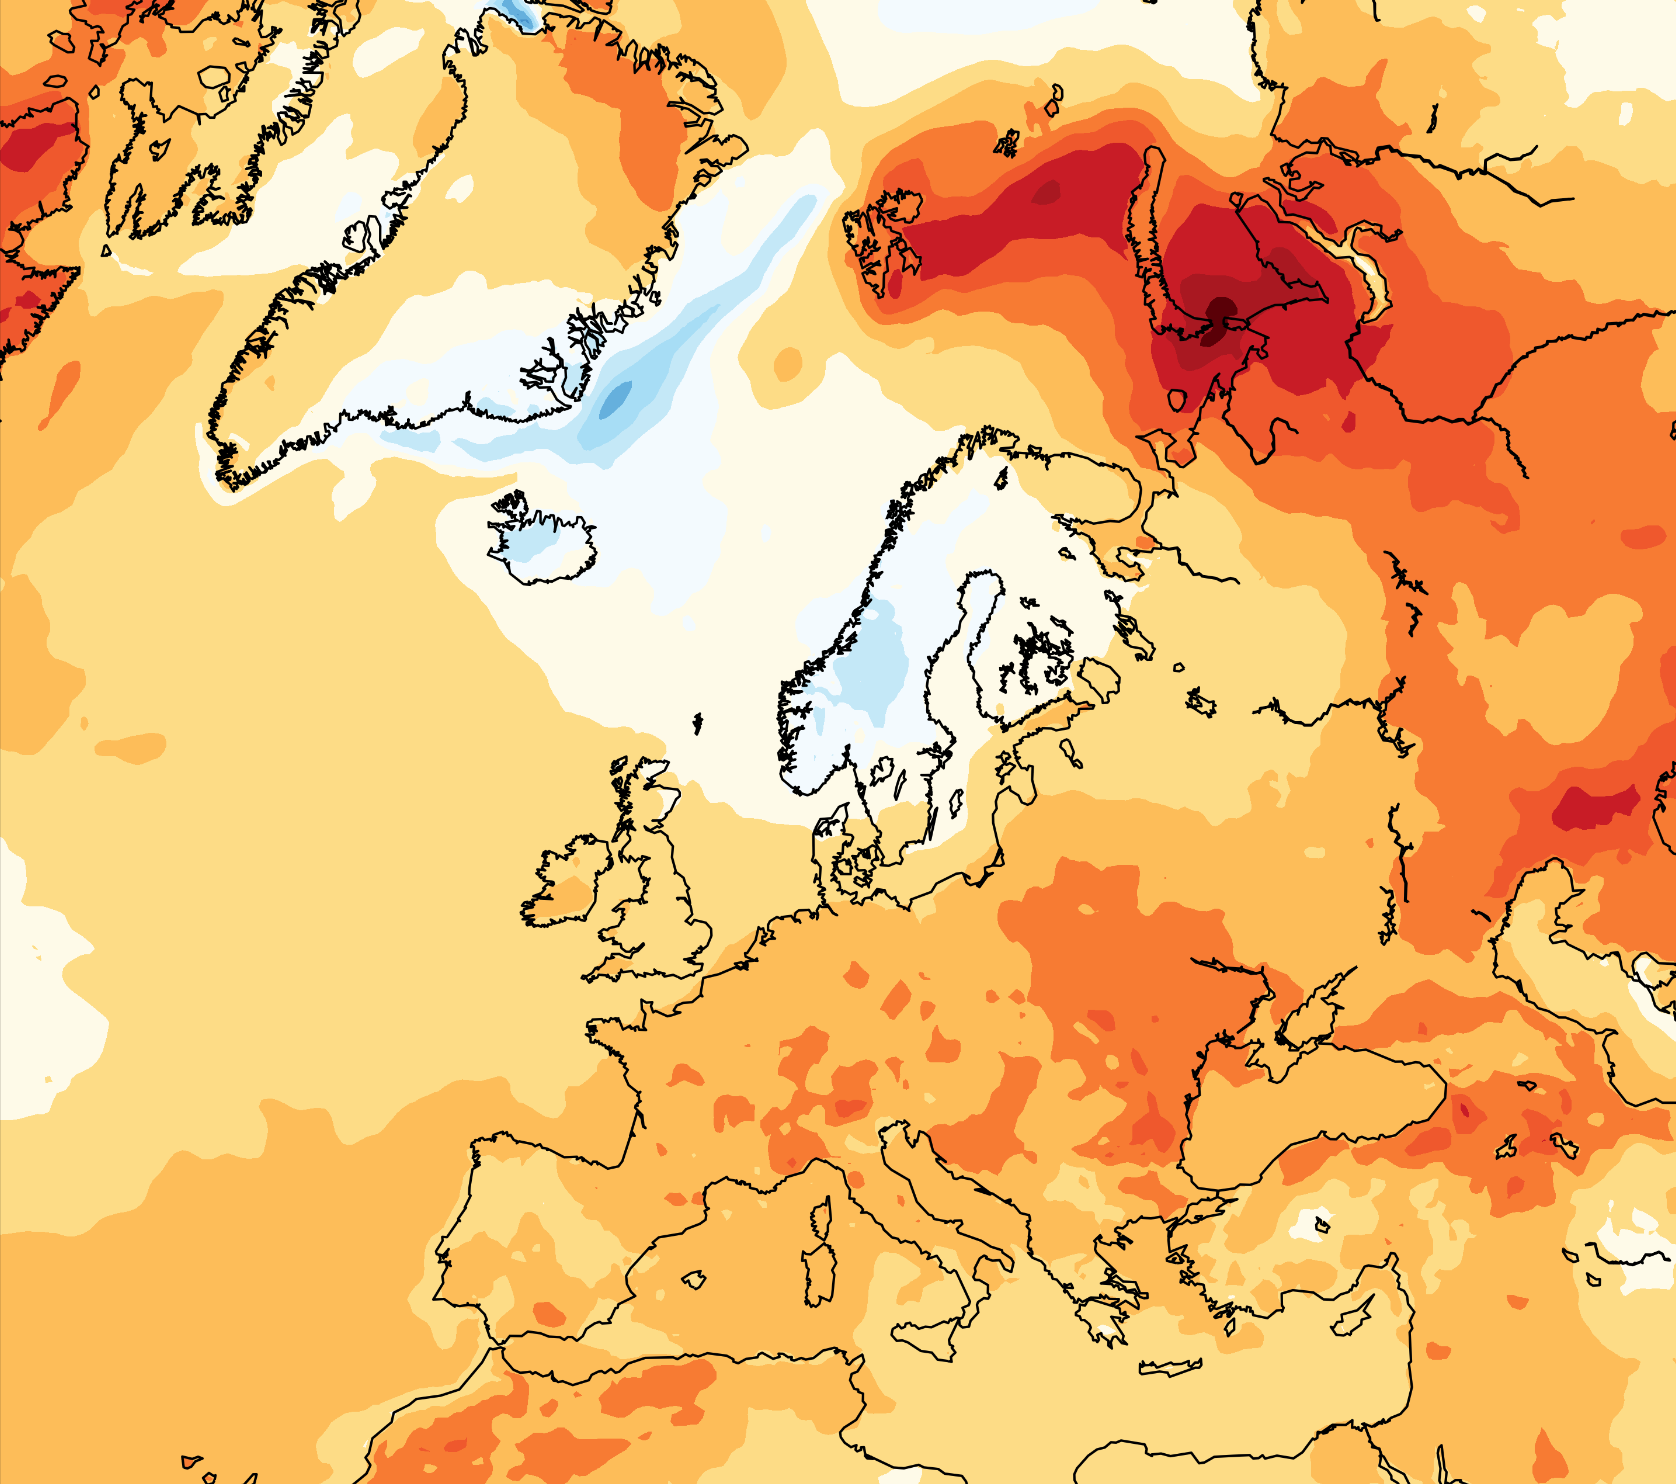 Surface air temperature anomalies in 2023. Credits: Copernicus Climate Change Service